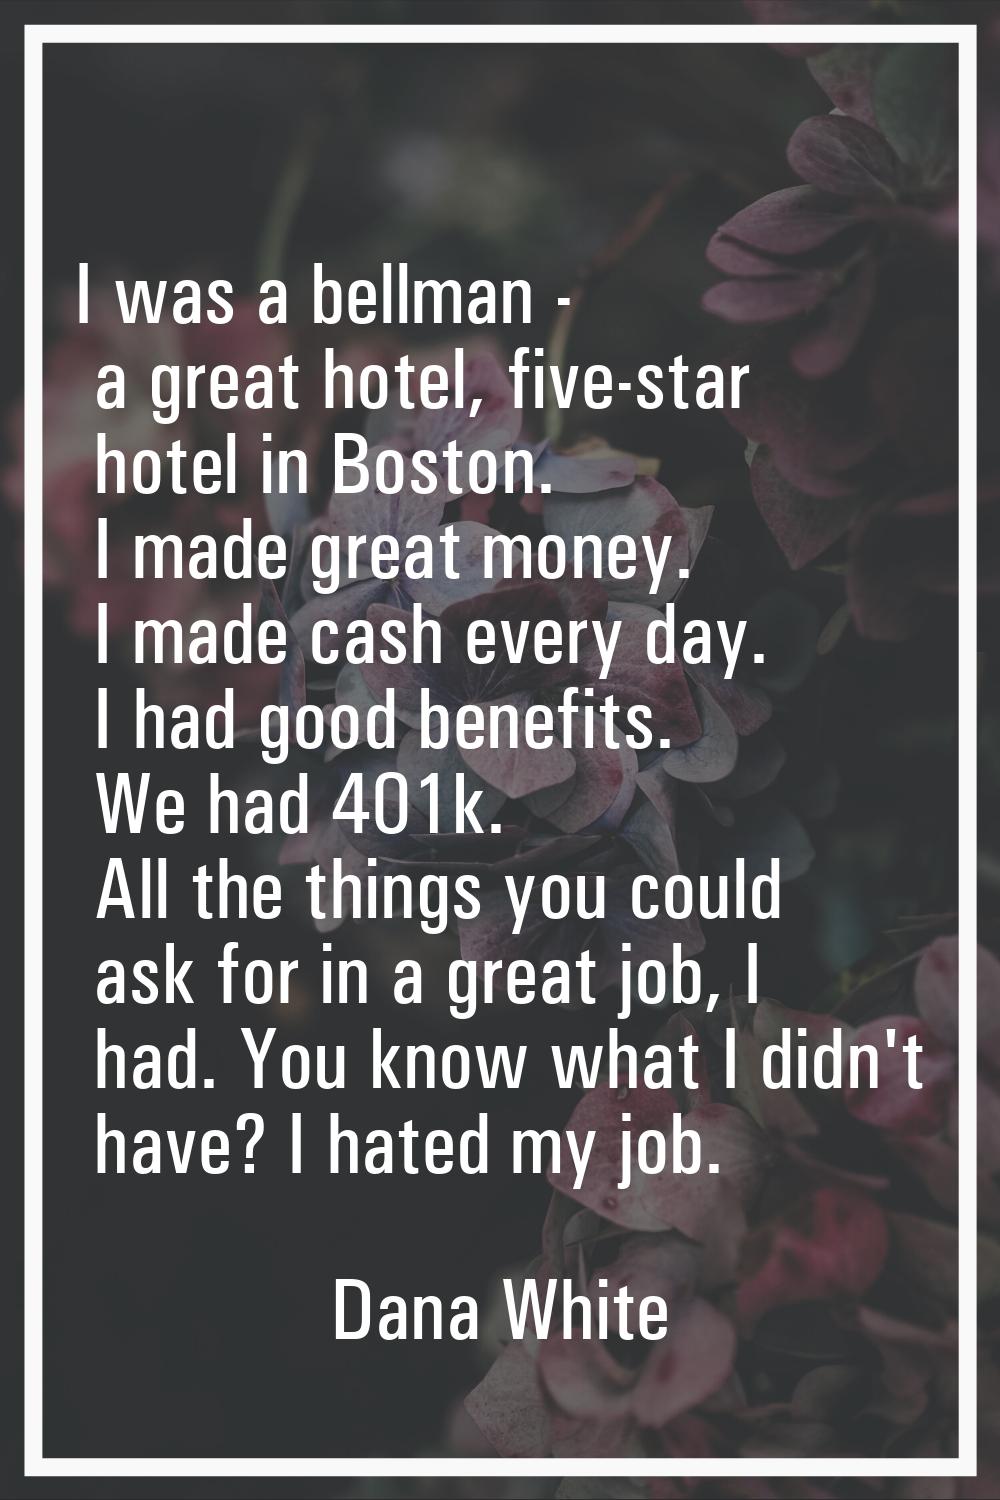 I was a bellman - a great hotel, five-star hotel in Boston. I made great money. I made cash every d